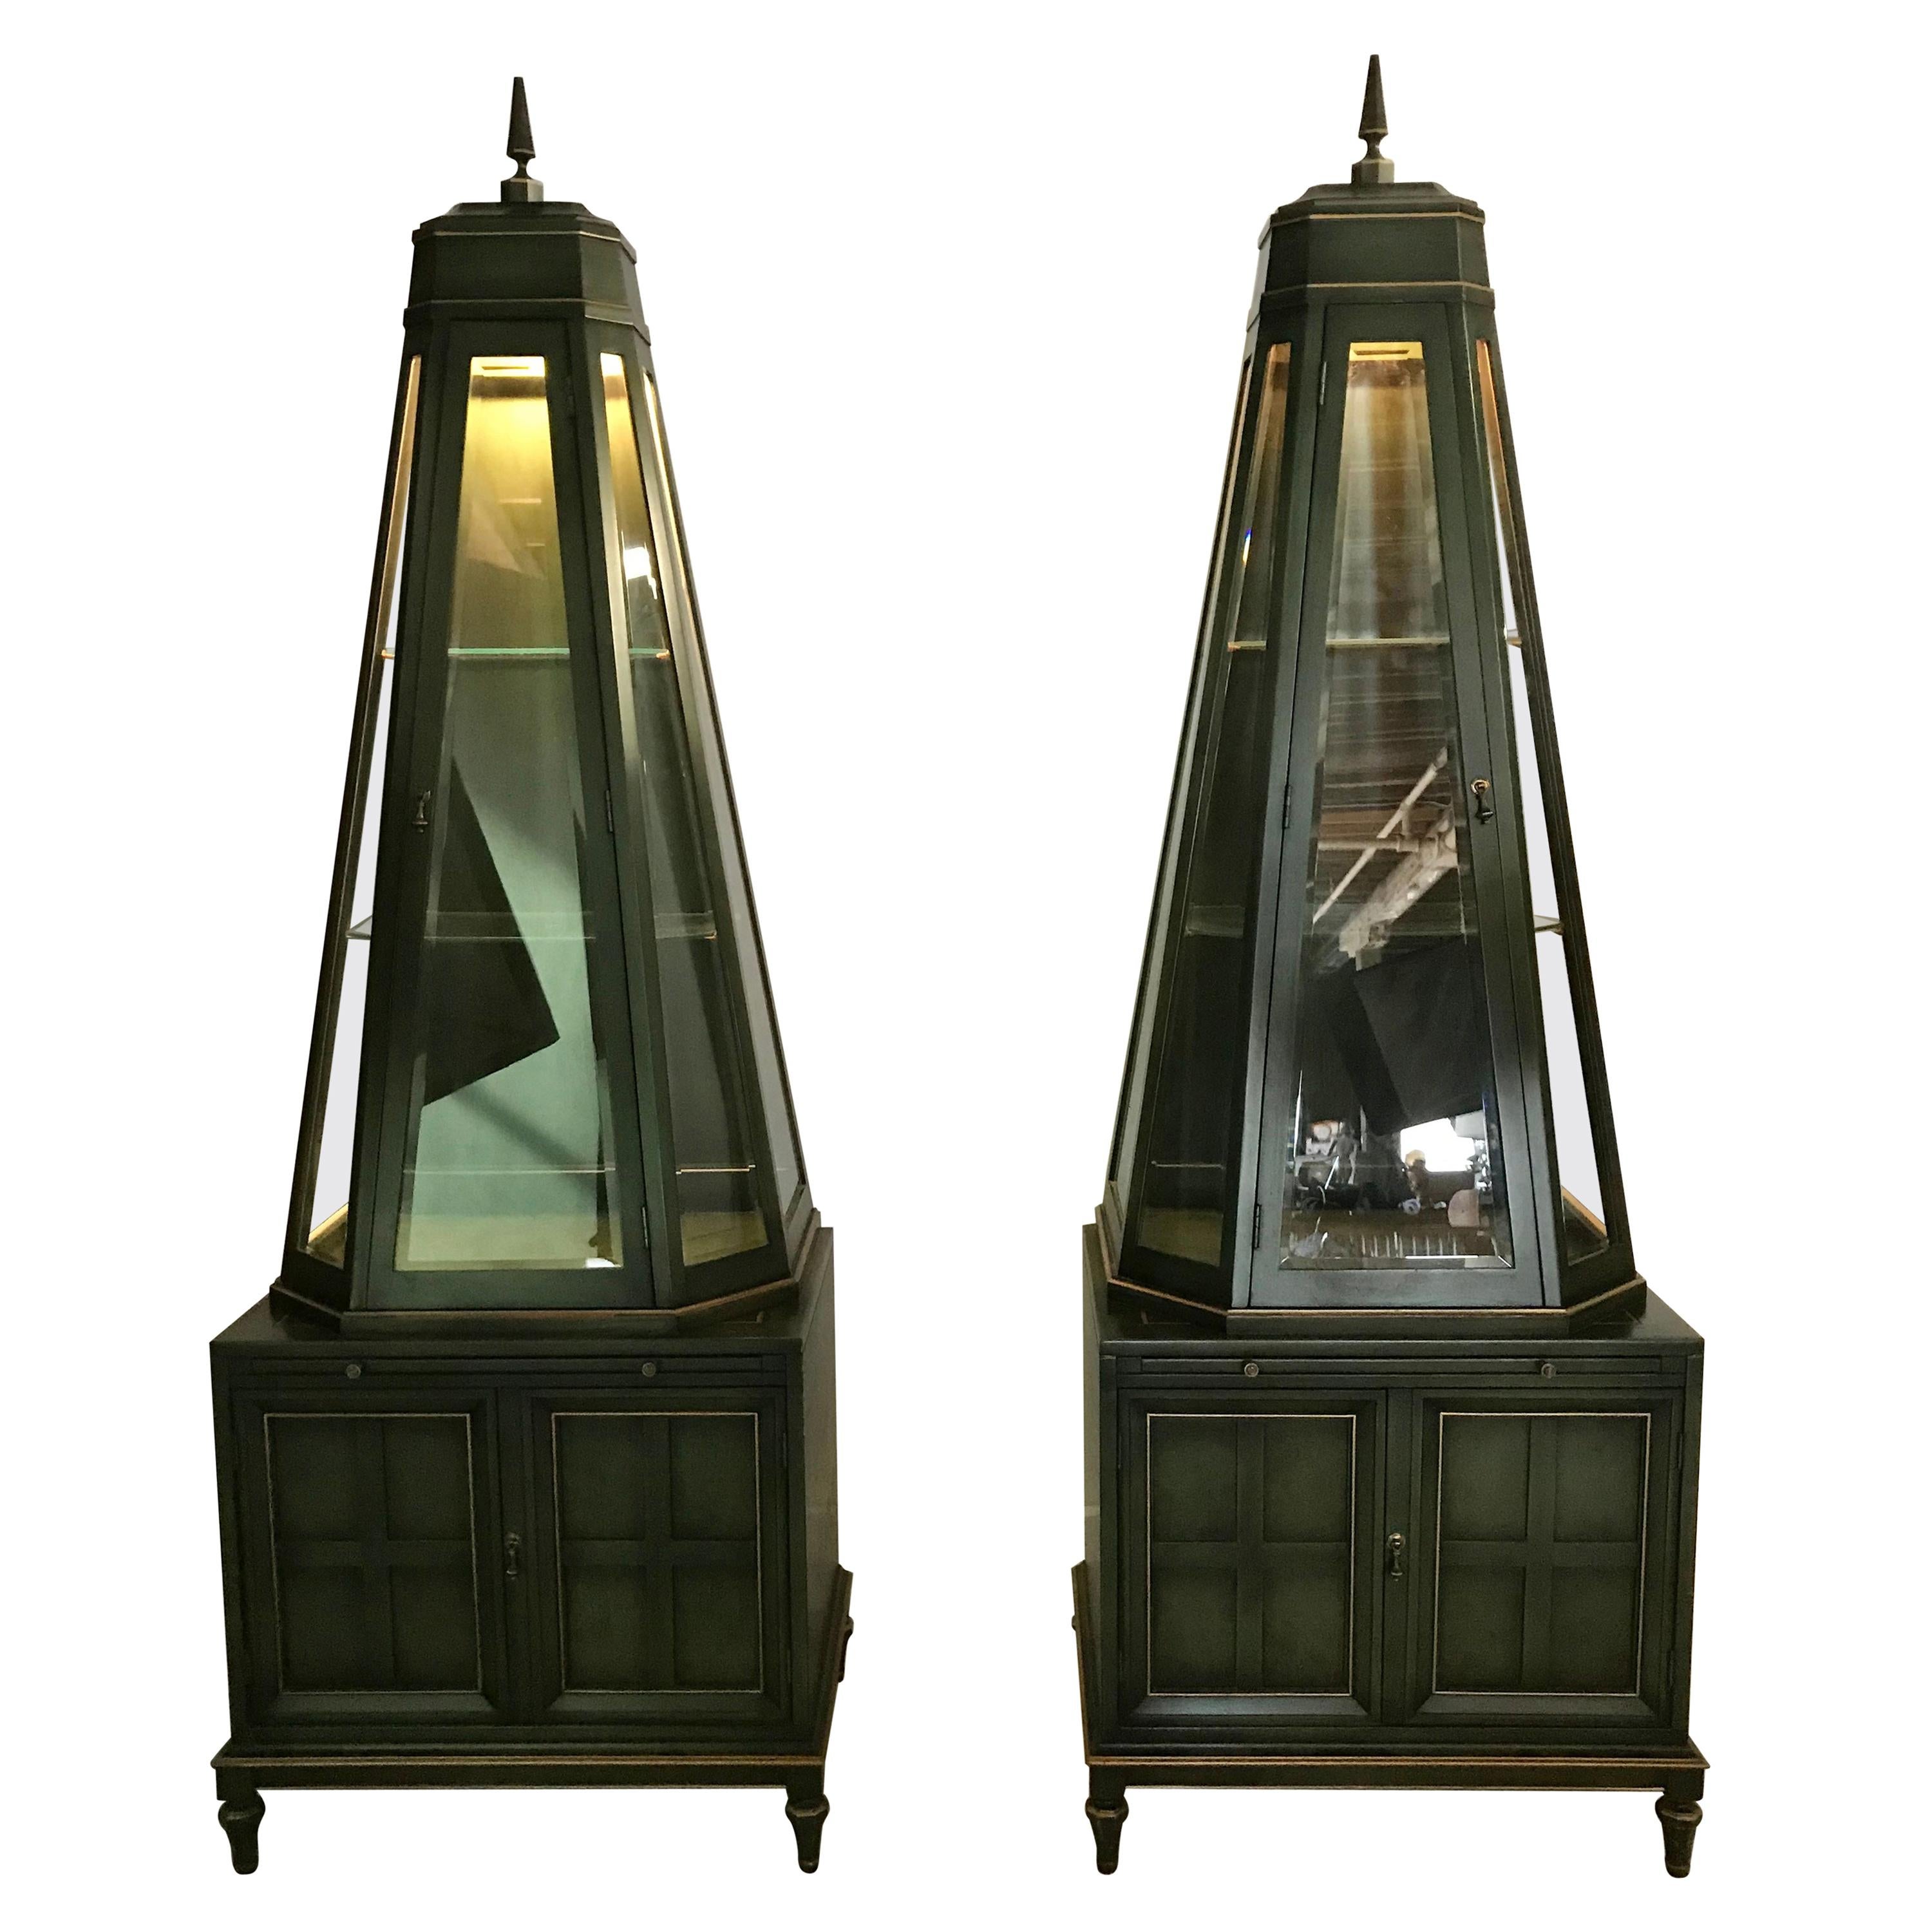 Unusual Pair of Decorative Pyramidal Curio Cabinets, Vitrines by Union National